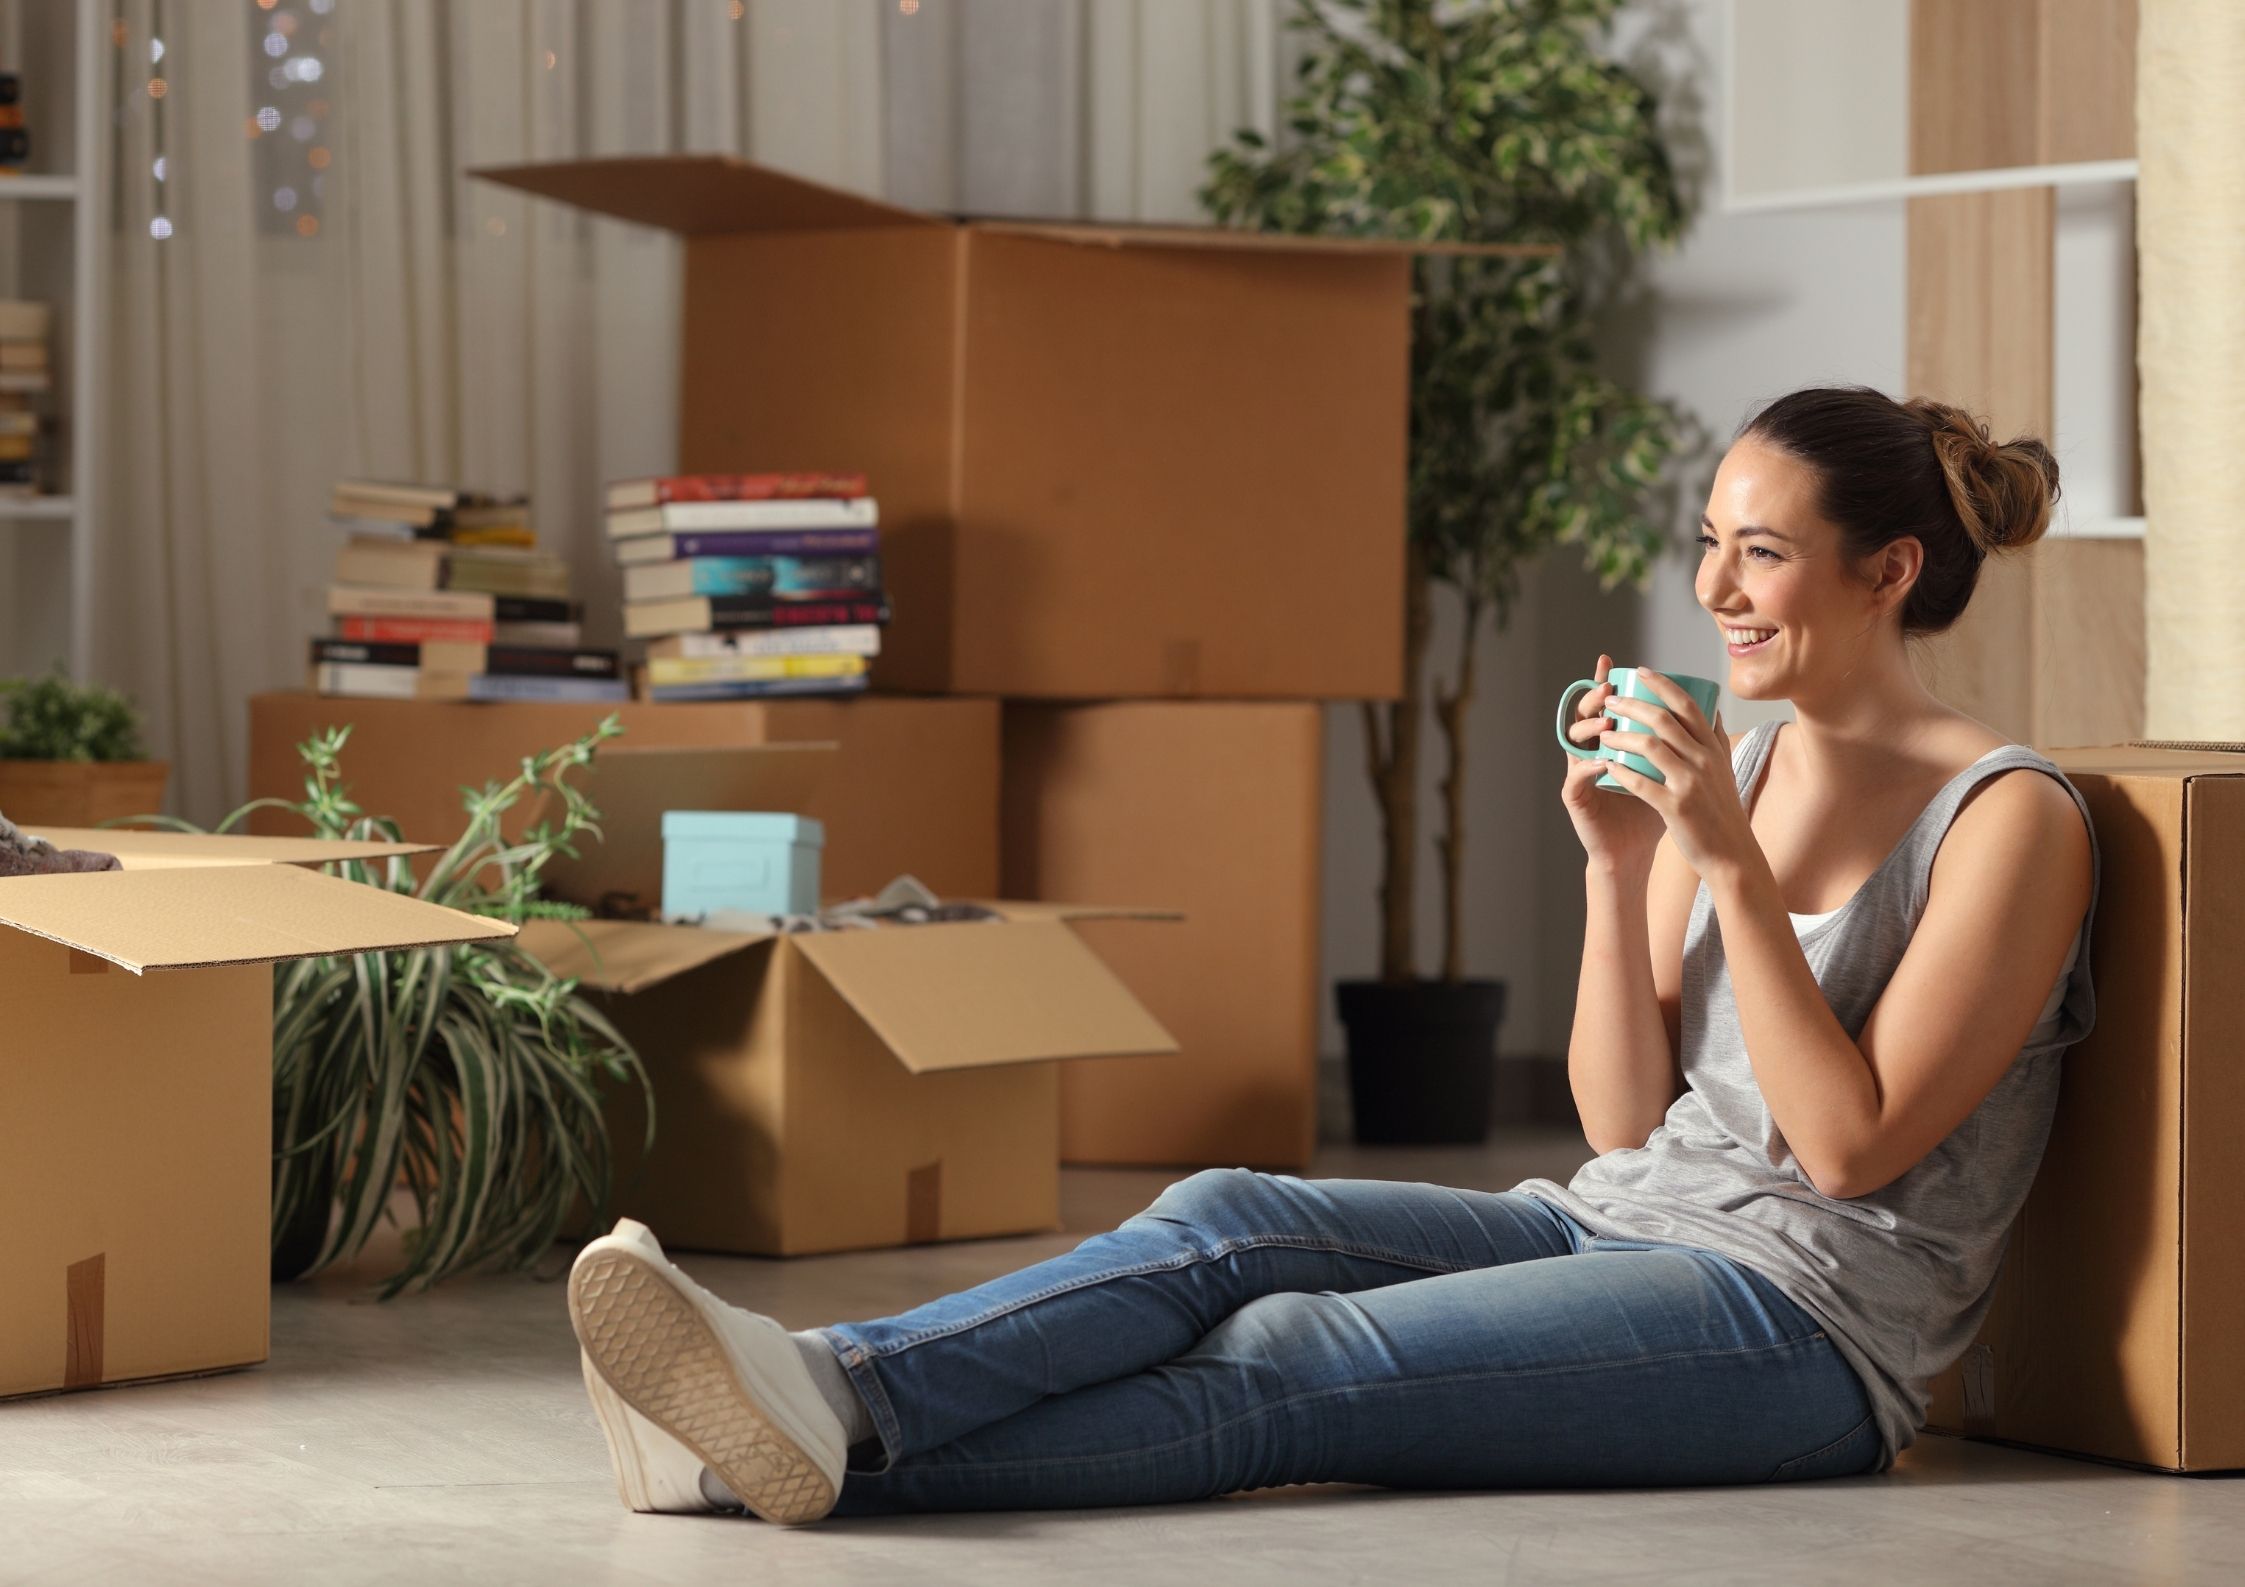 Ways to Find and Keep Good Tenants for Your Rental Properties